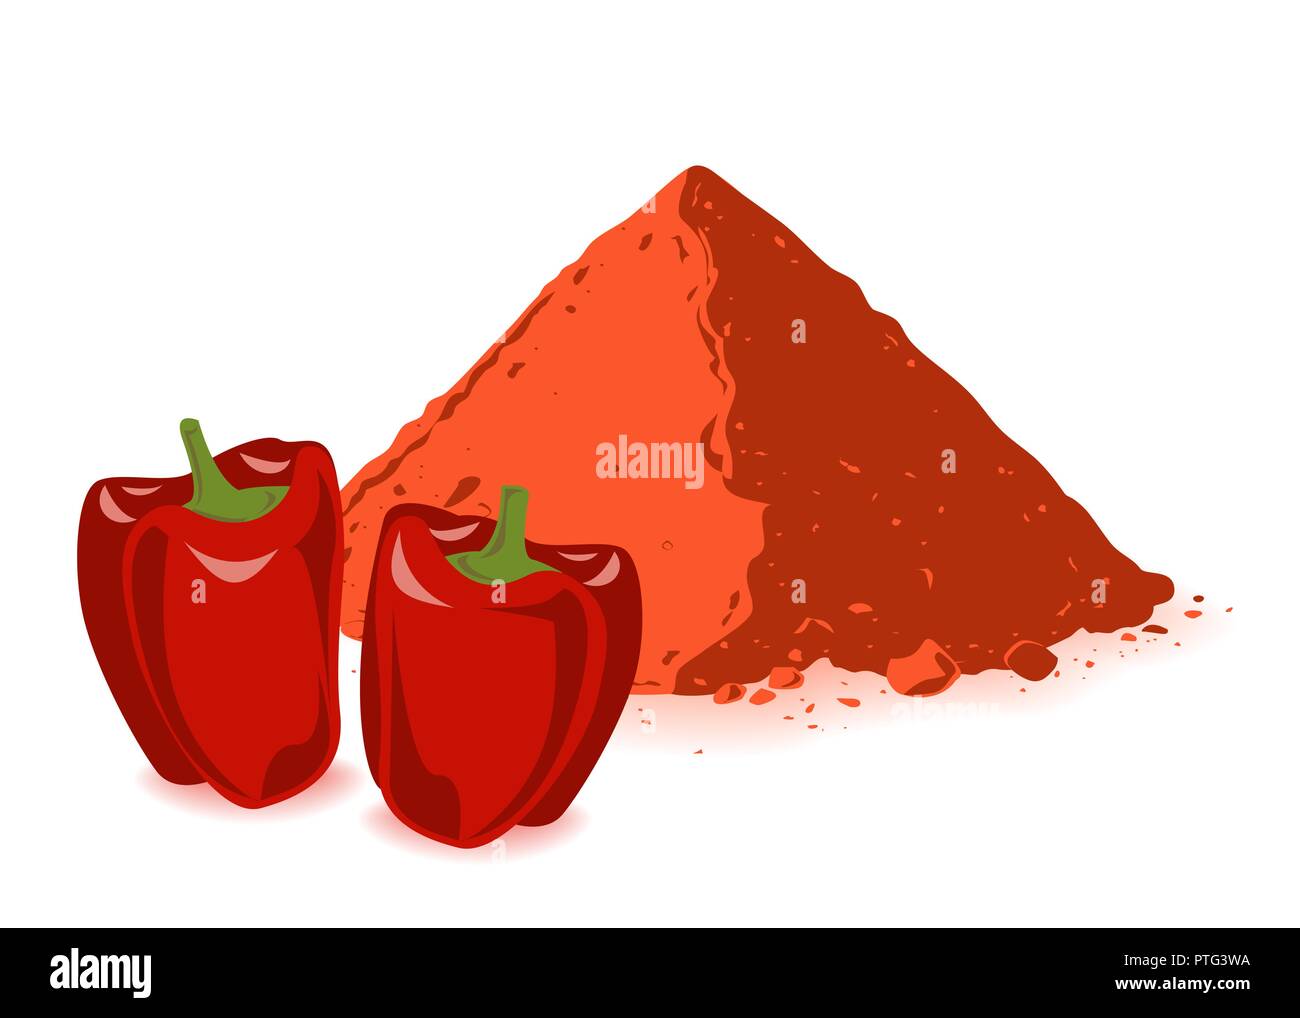 Paprika powder and bell pepper isolated on white background. Vector illustration. For food design, restaurant, store, market, natural health care prod Stock Vector